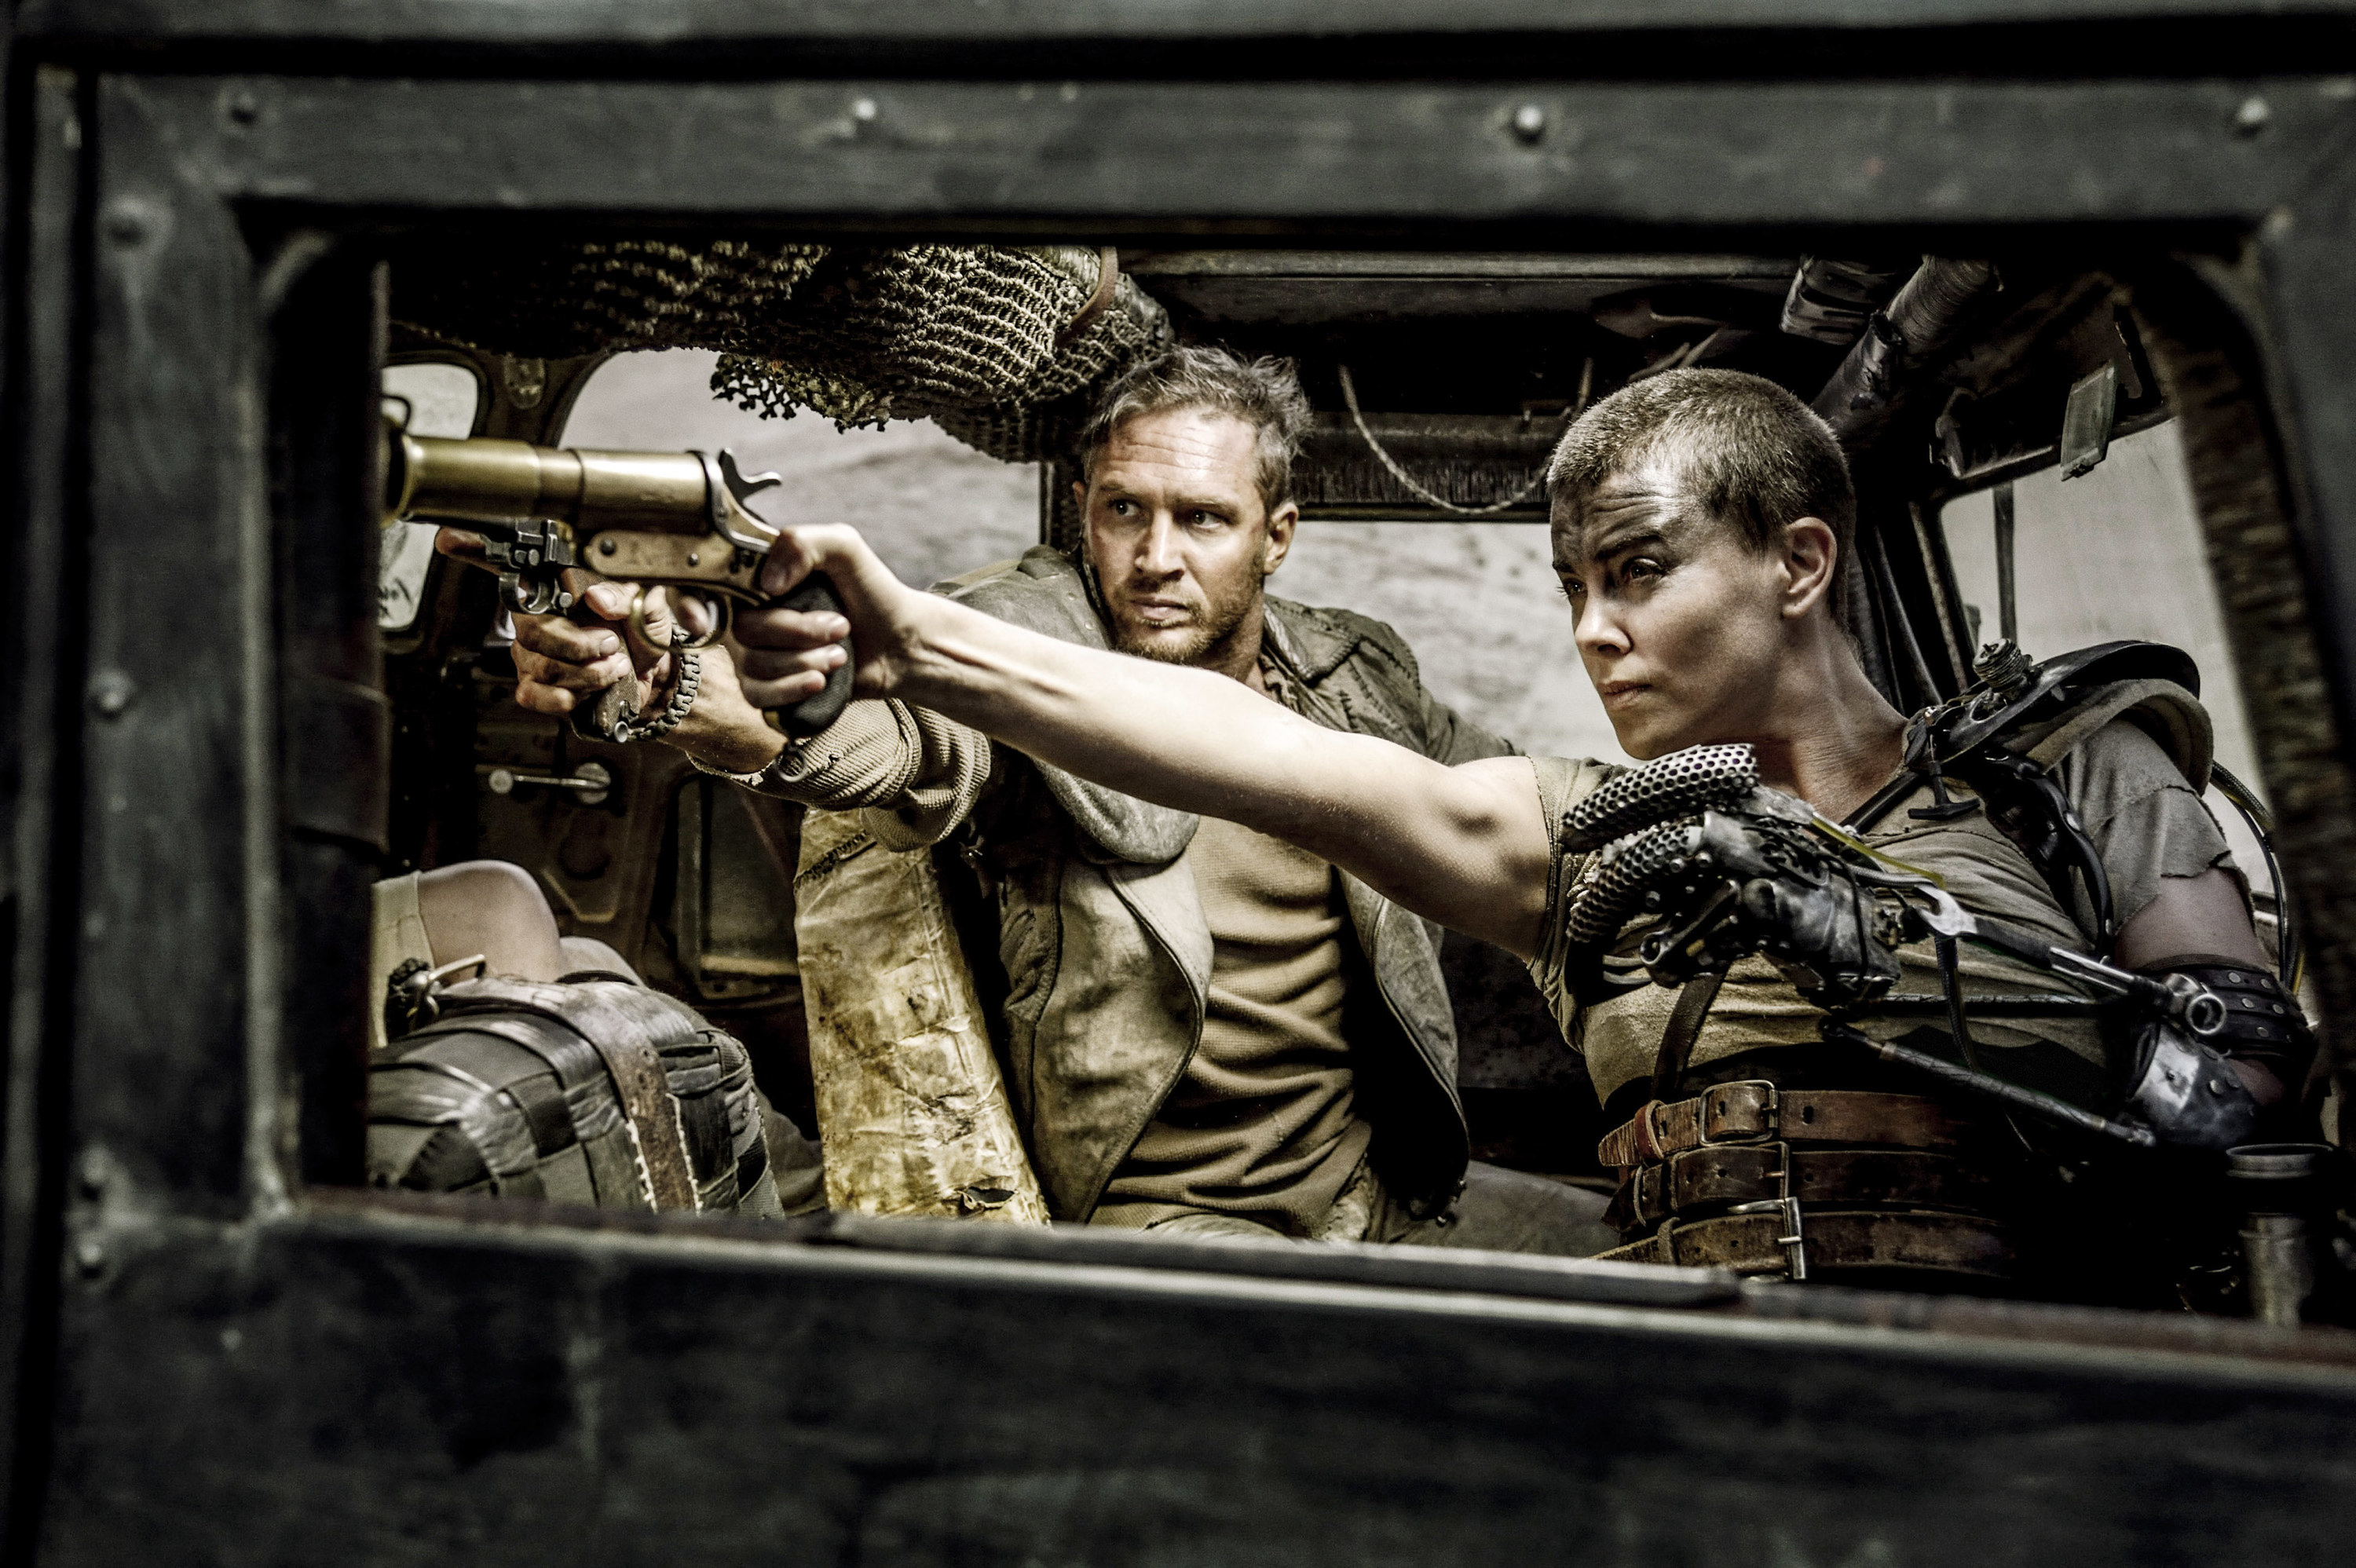 Still of Tom and Charlize as Max and Furiosa in the movie